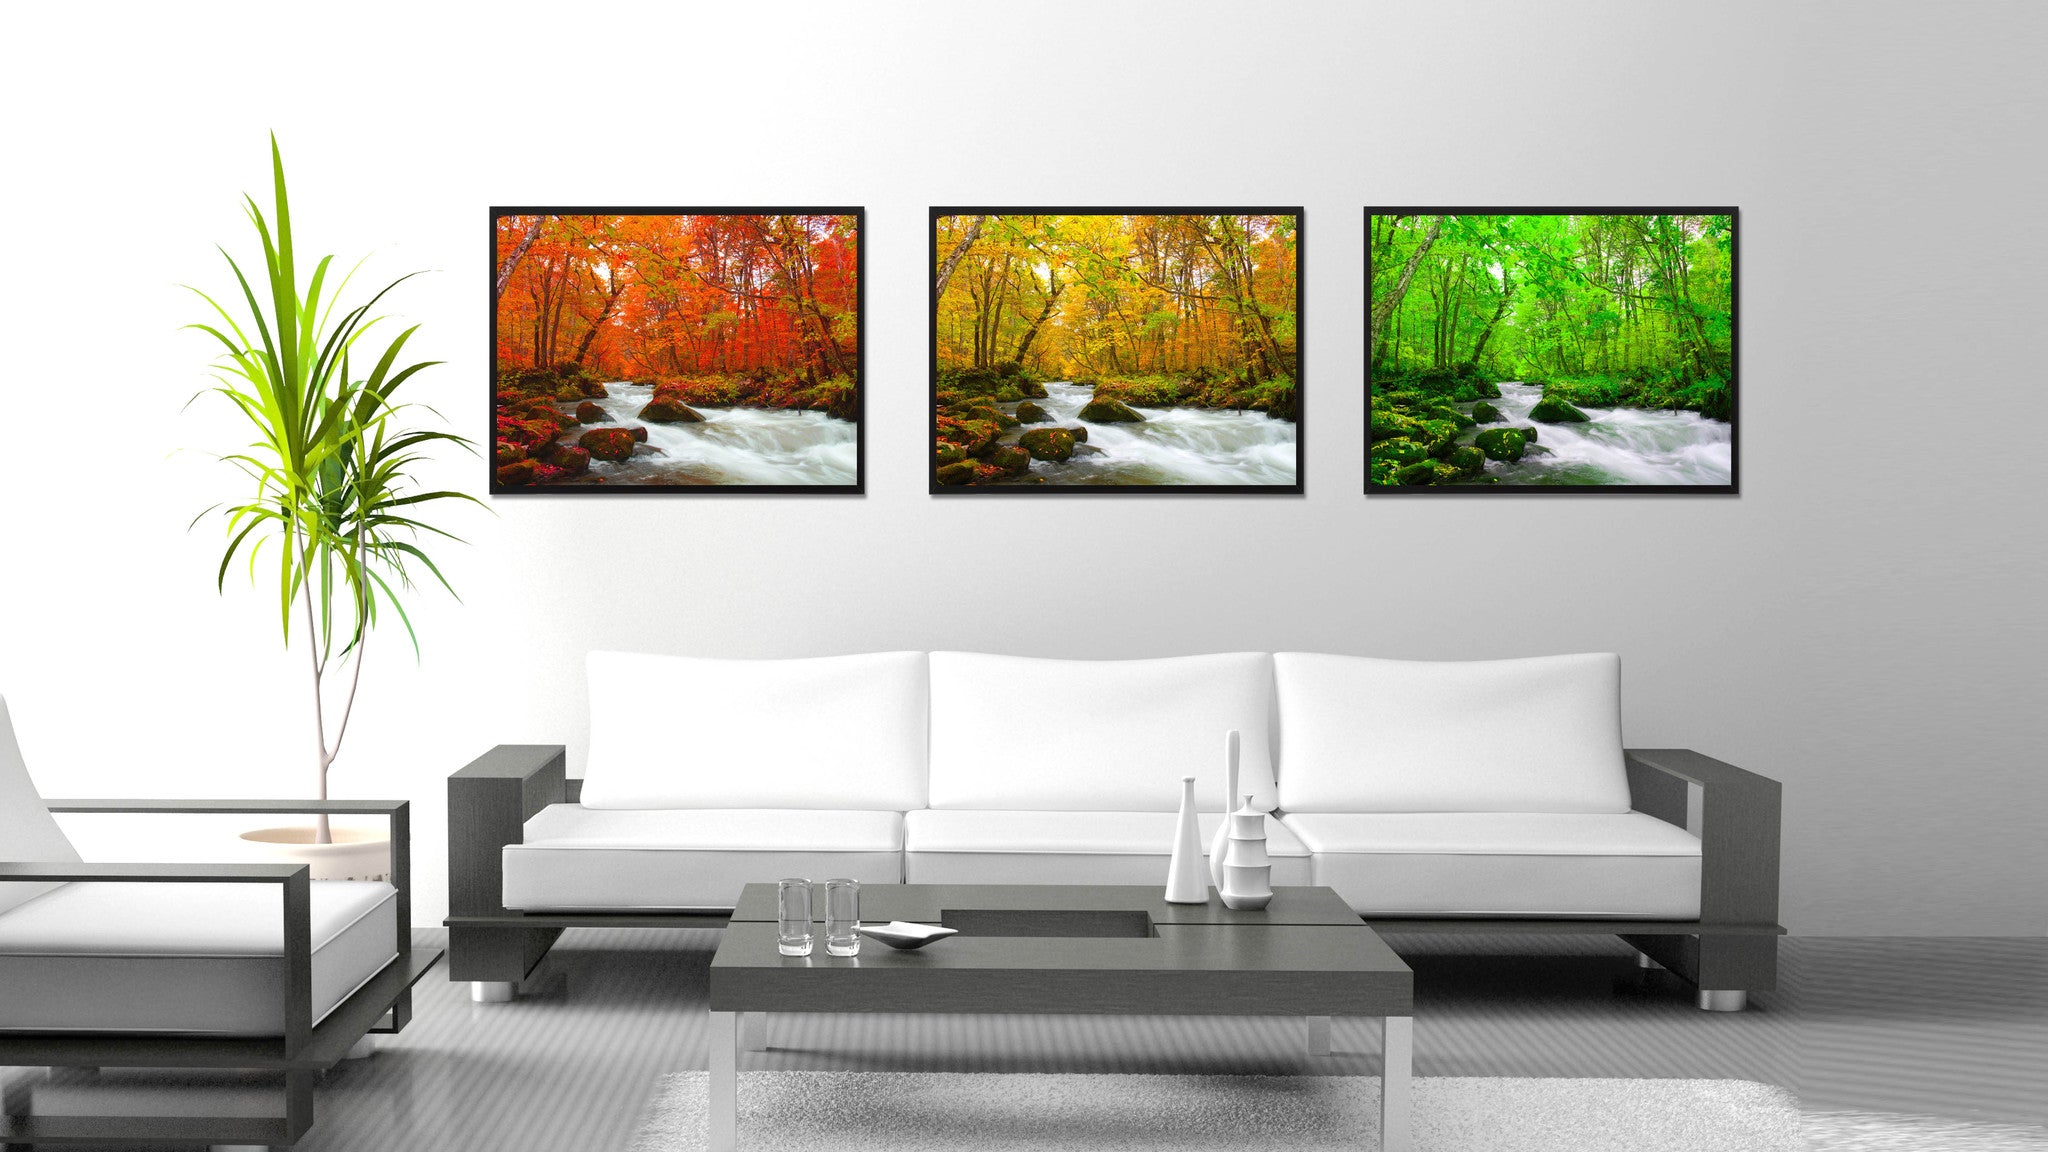 Autumn Stream Green Landscape Photo Canvas Print Pictures Frames Home Décor Wall Art Gifts